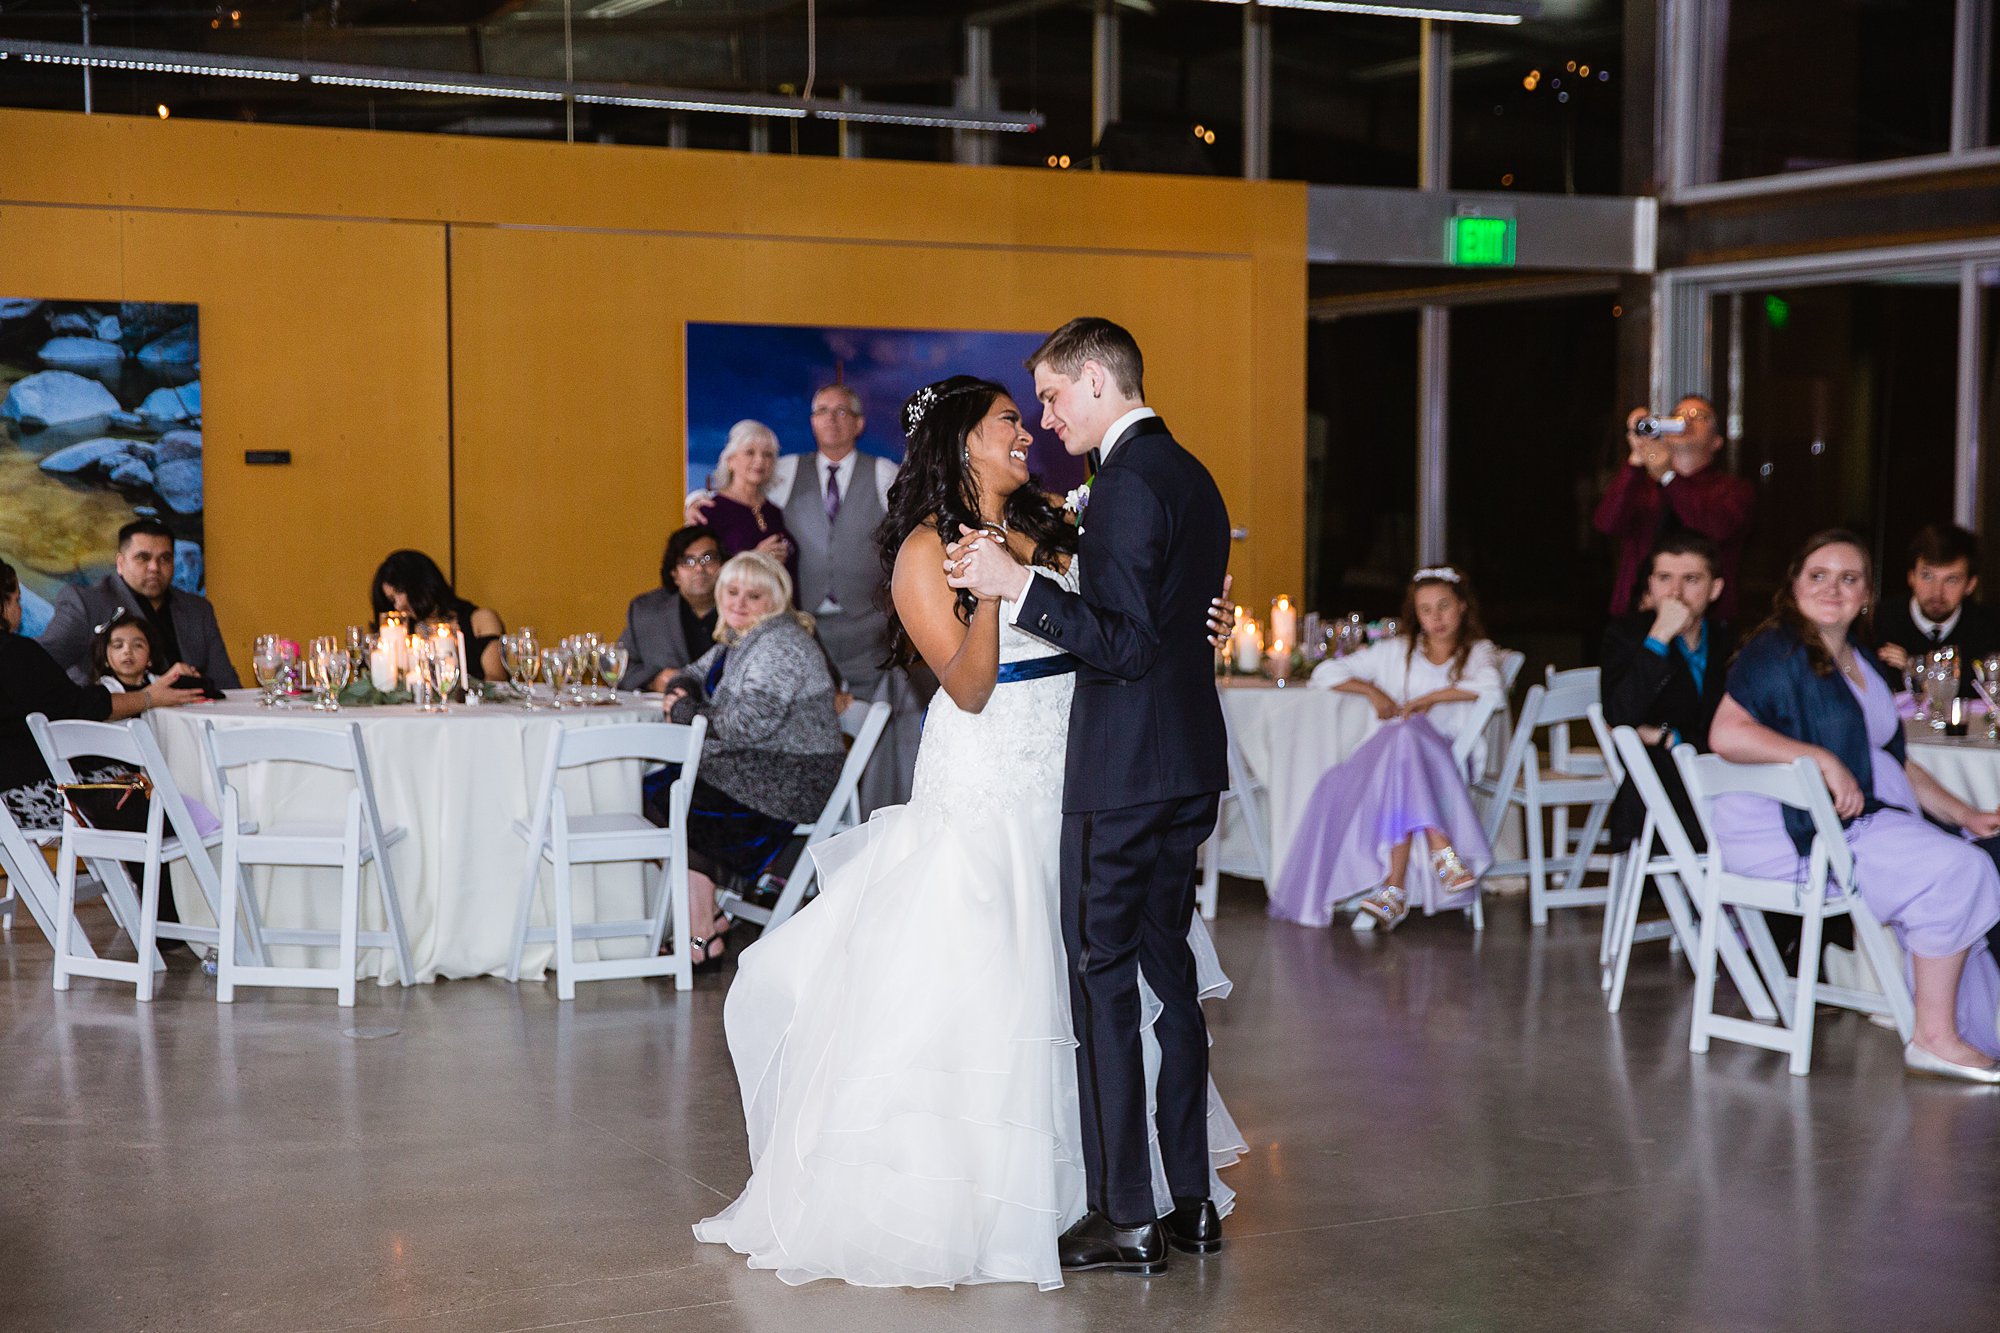 Bride and groom sharing their first dance at their wedding reception at the Rio Salado Audubon center by Phoenix wedding photographer PMA Photography.